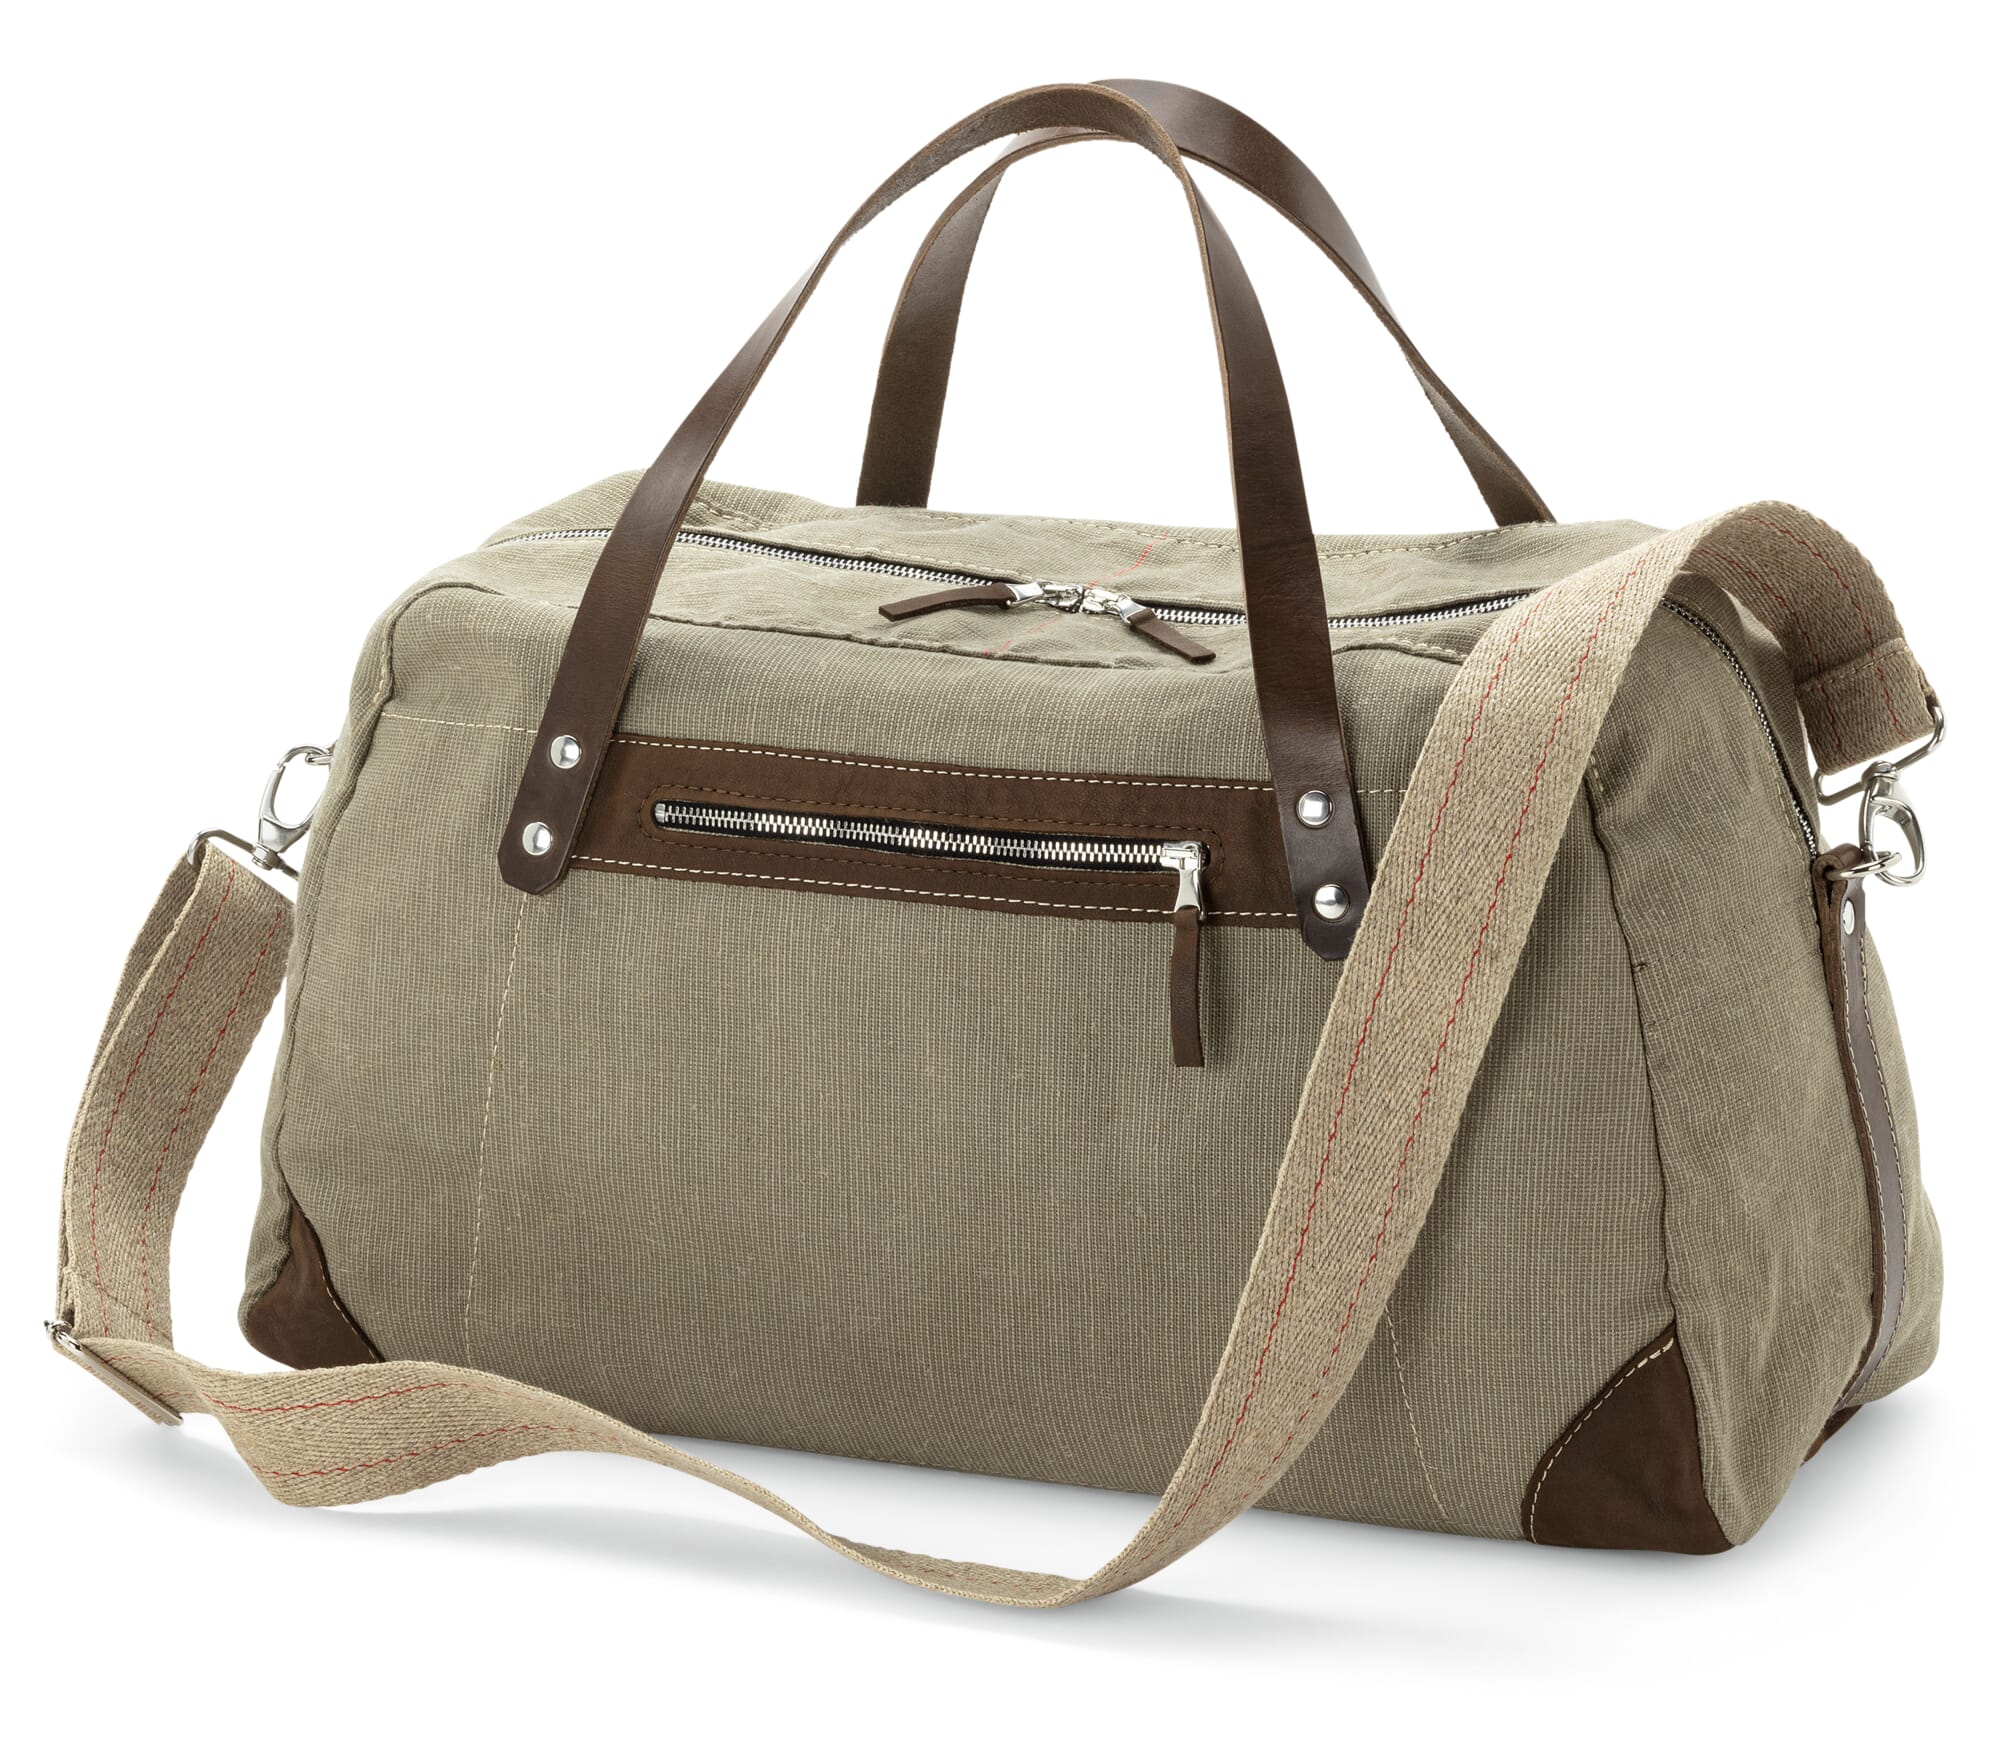 Tobacco Suede Boston Travel Bag | The Go-To